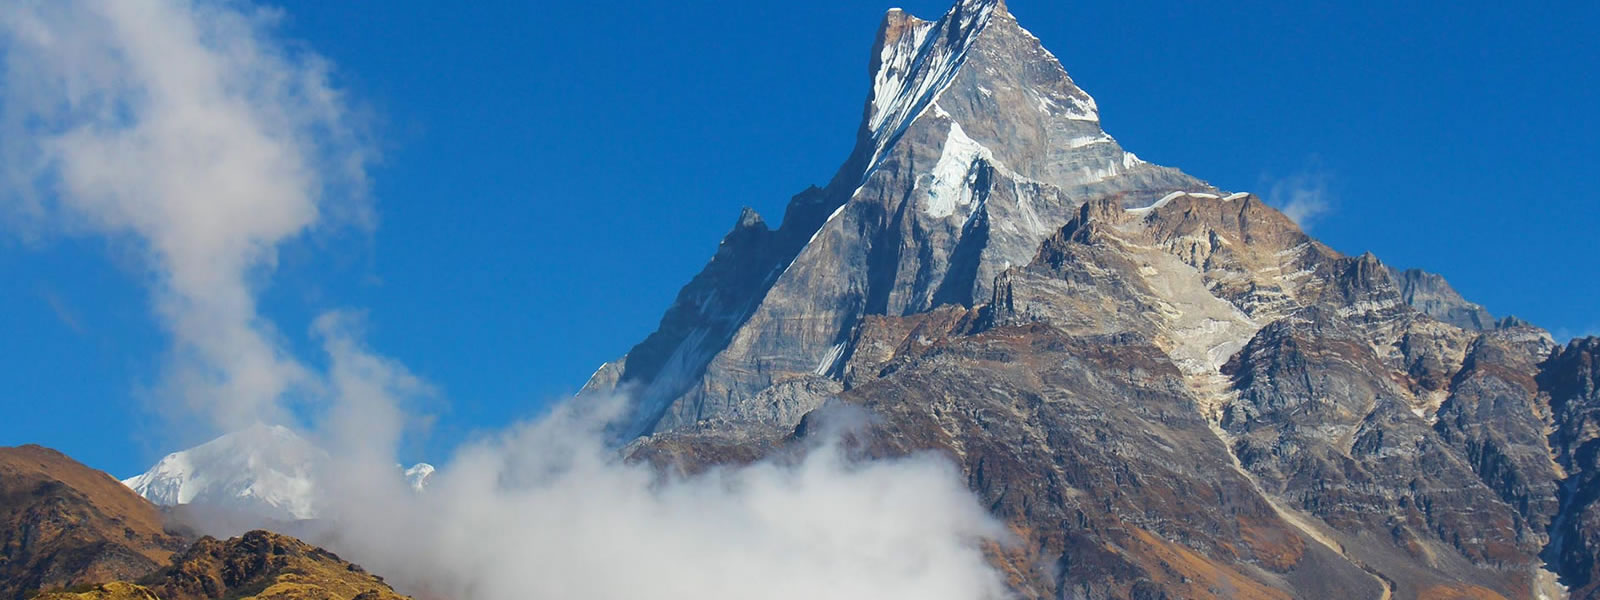 Mardi Himal Trek also can be done in January